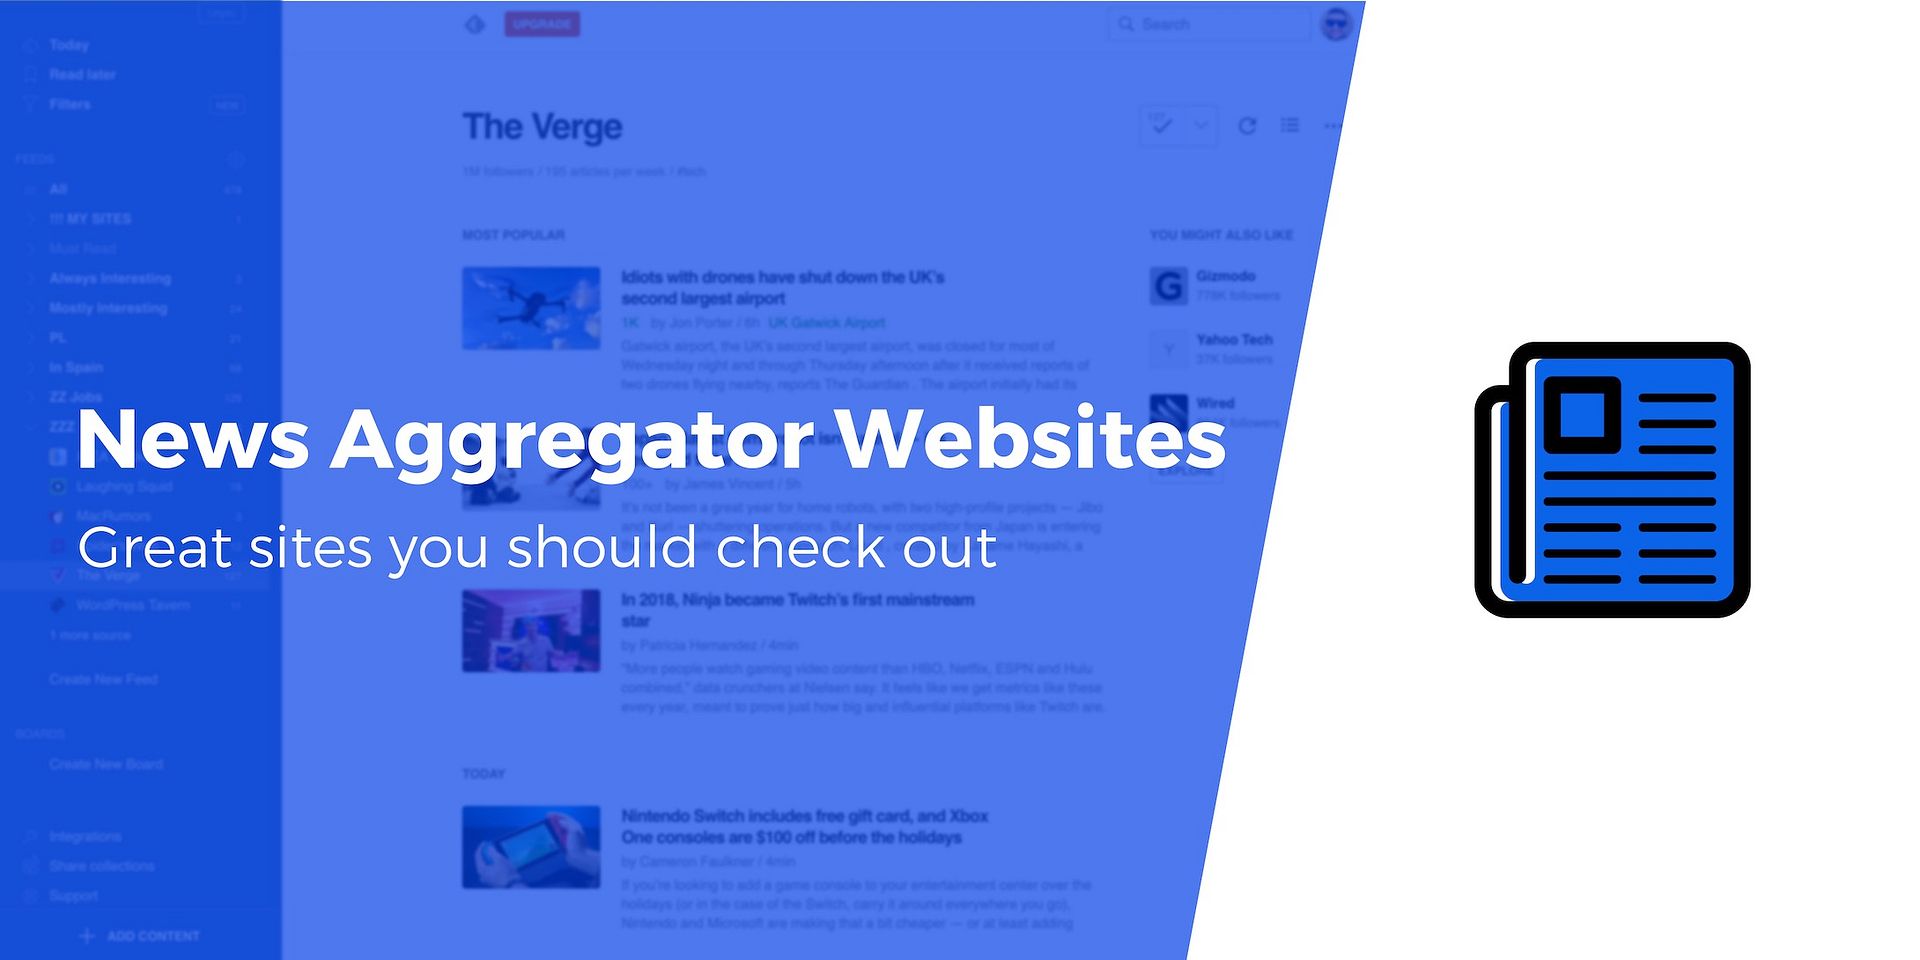 8 Great News Aggregator Websites You Should Check Out